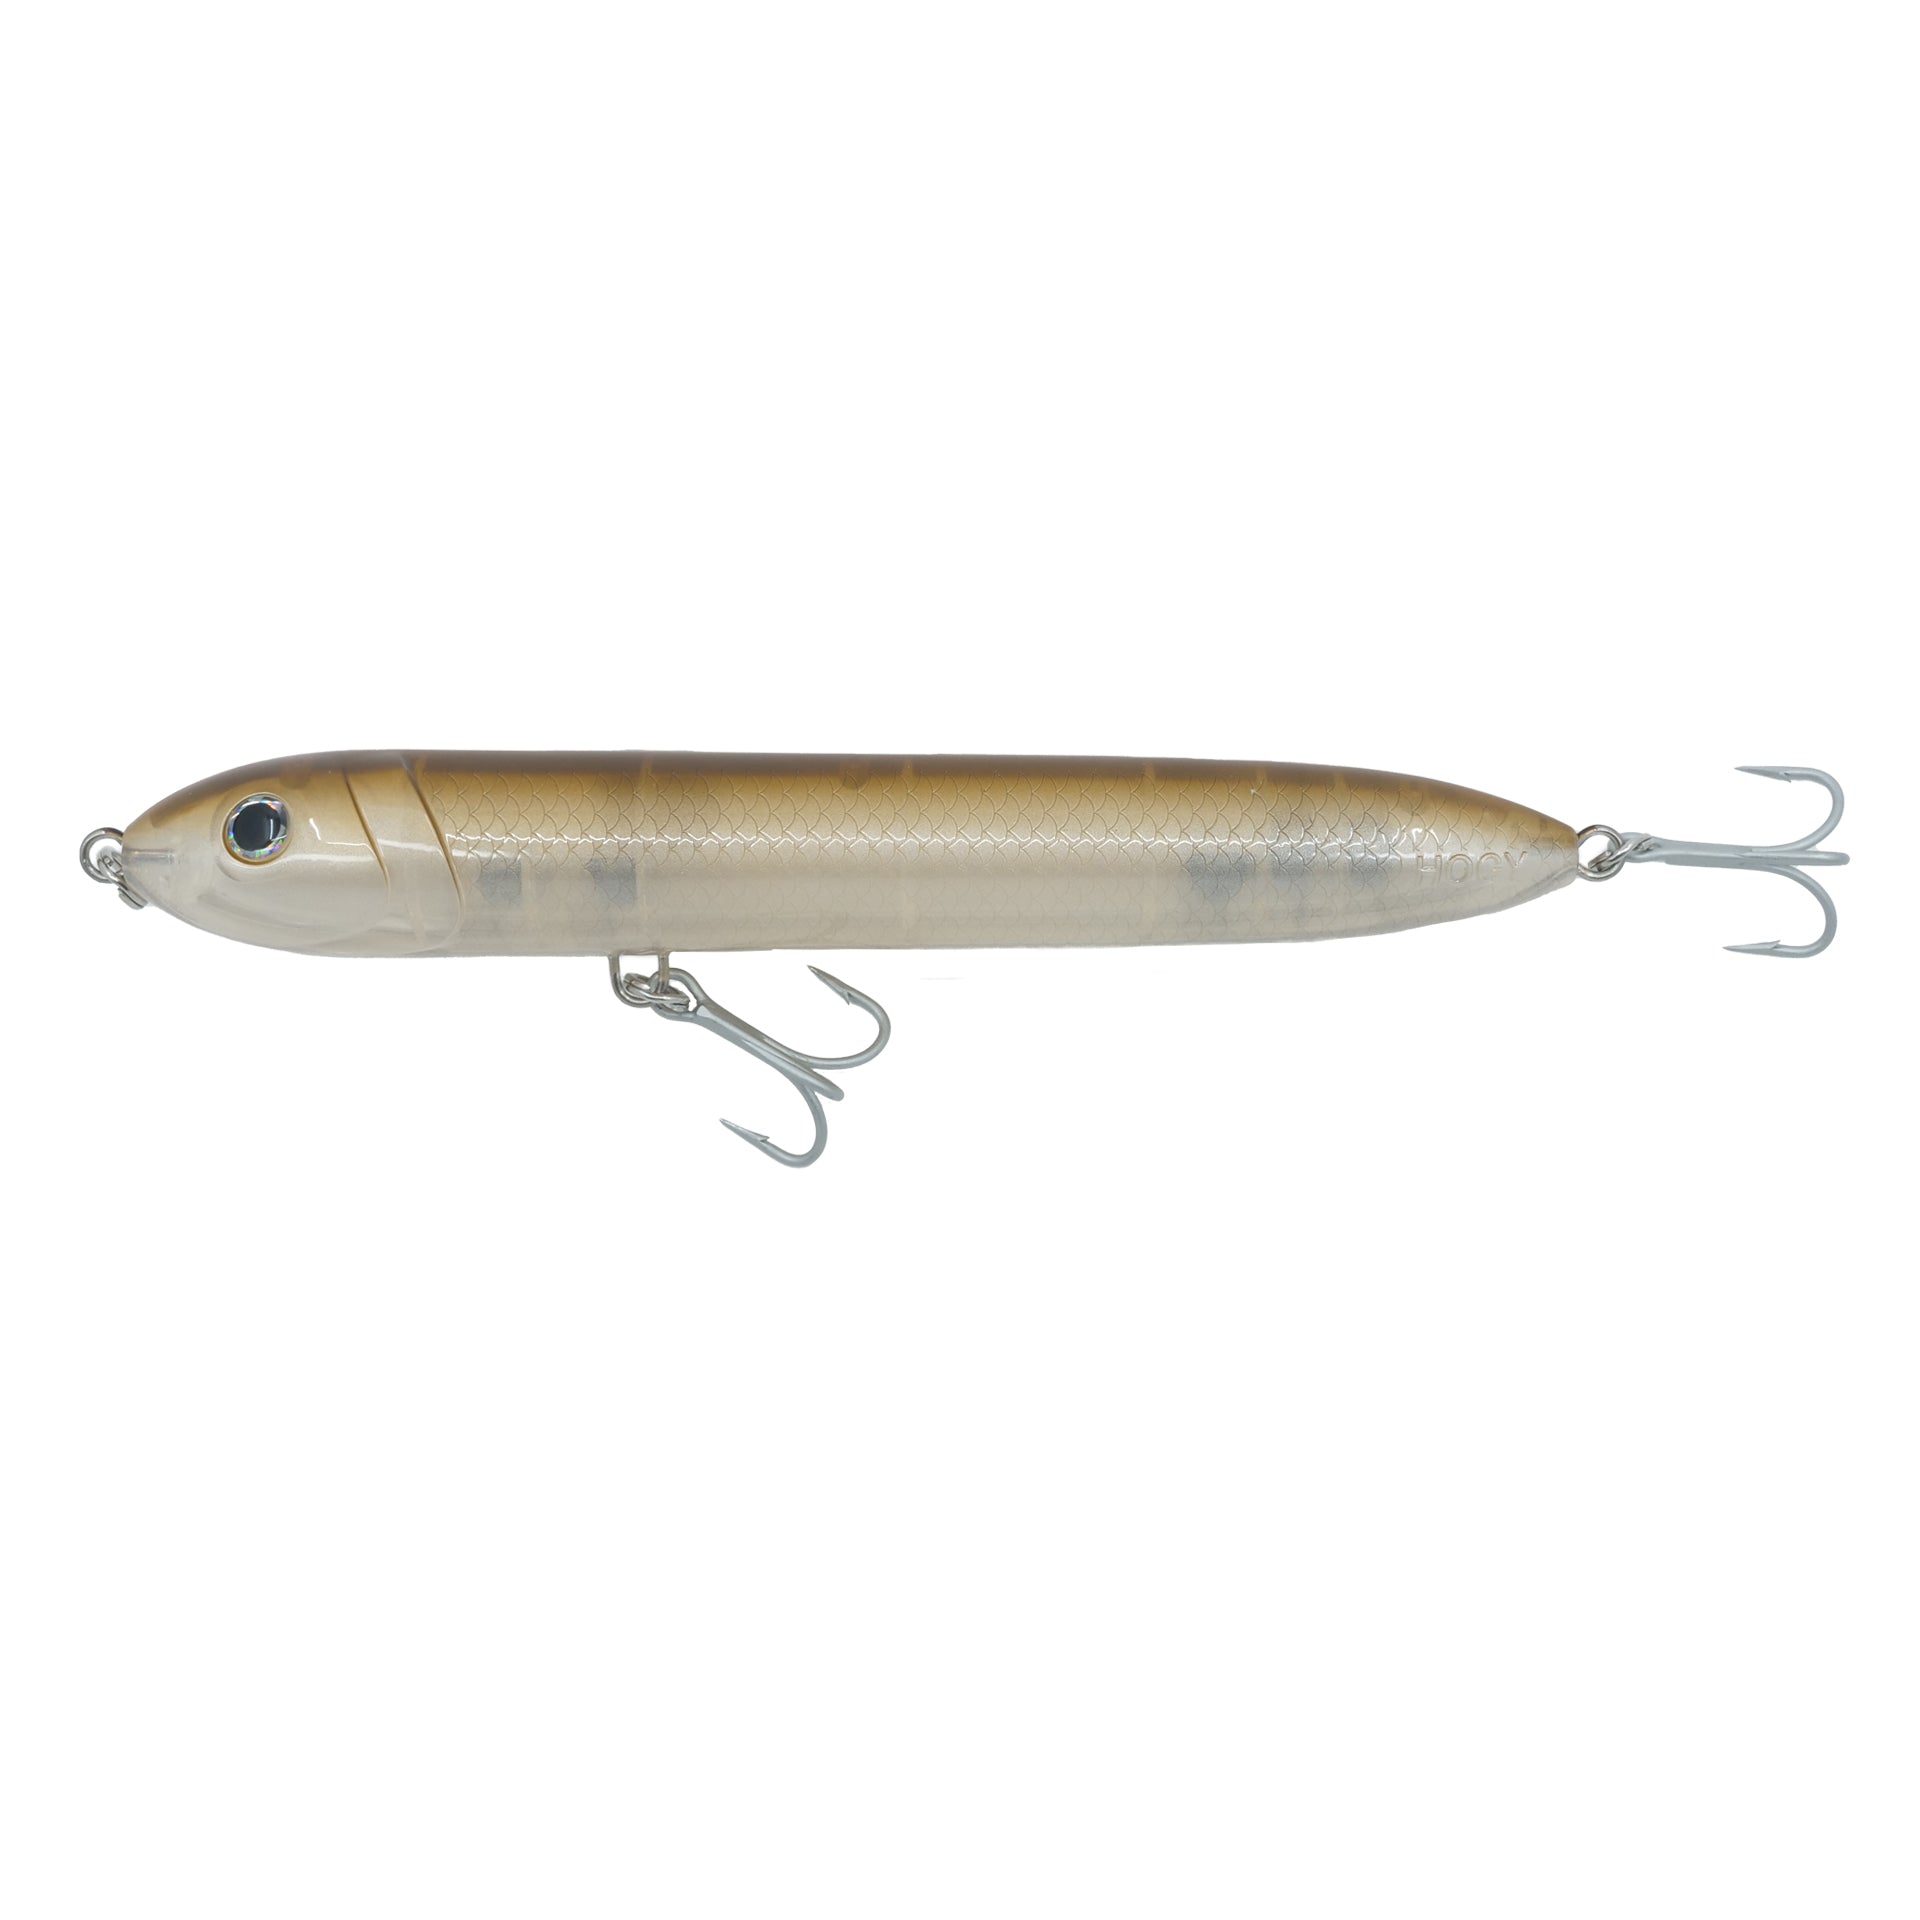 dog lure, dog lure Suppliers and Manufacturers at